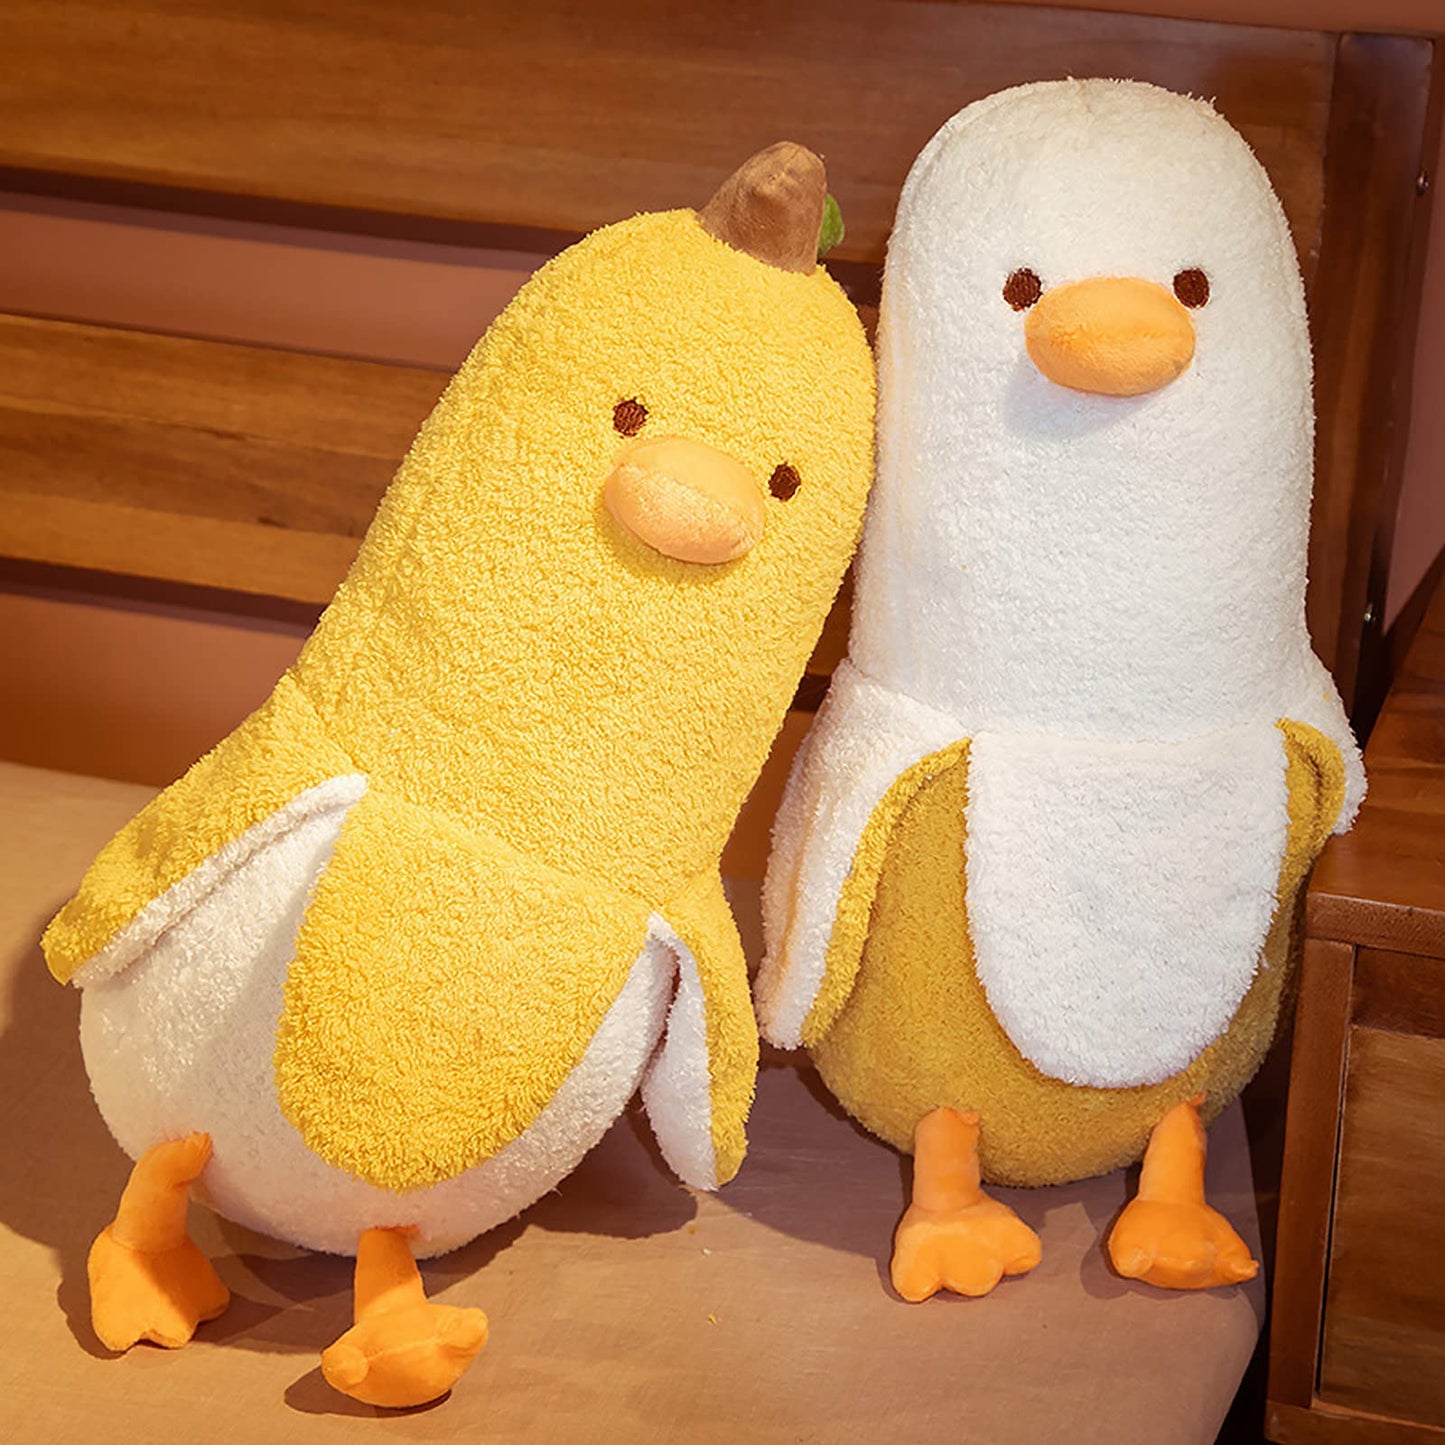 Banana Duck Plush Toy - Adorable 35.5" Hugging Plush Pillow for Girls and Boys in Vibrant Yellow